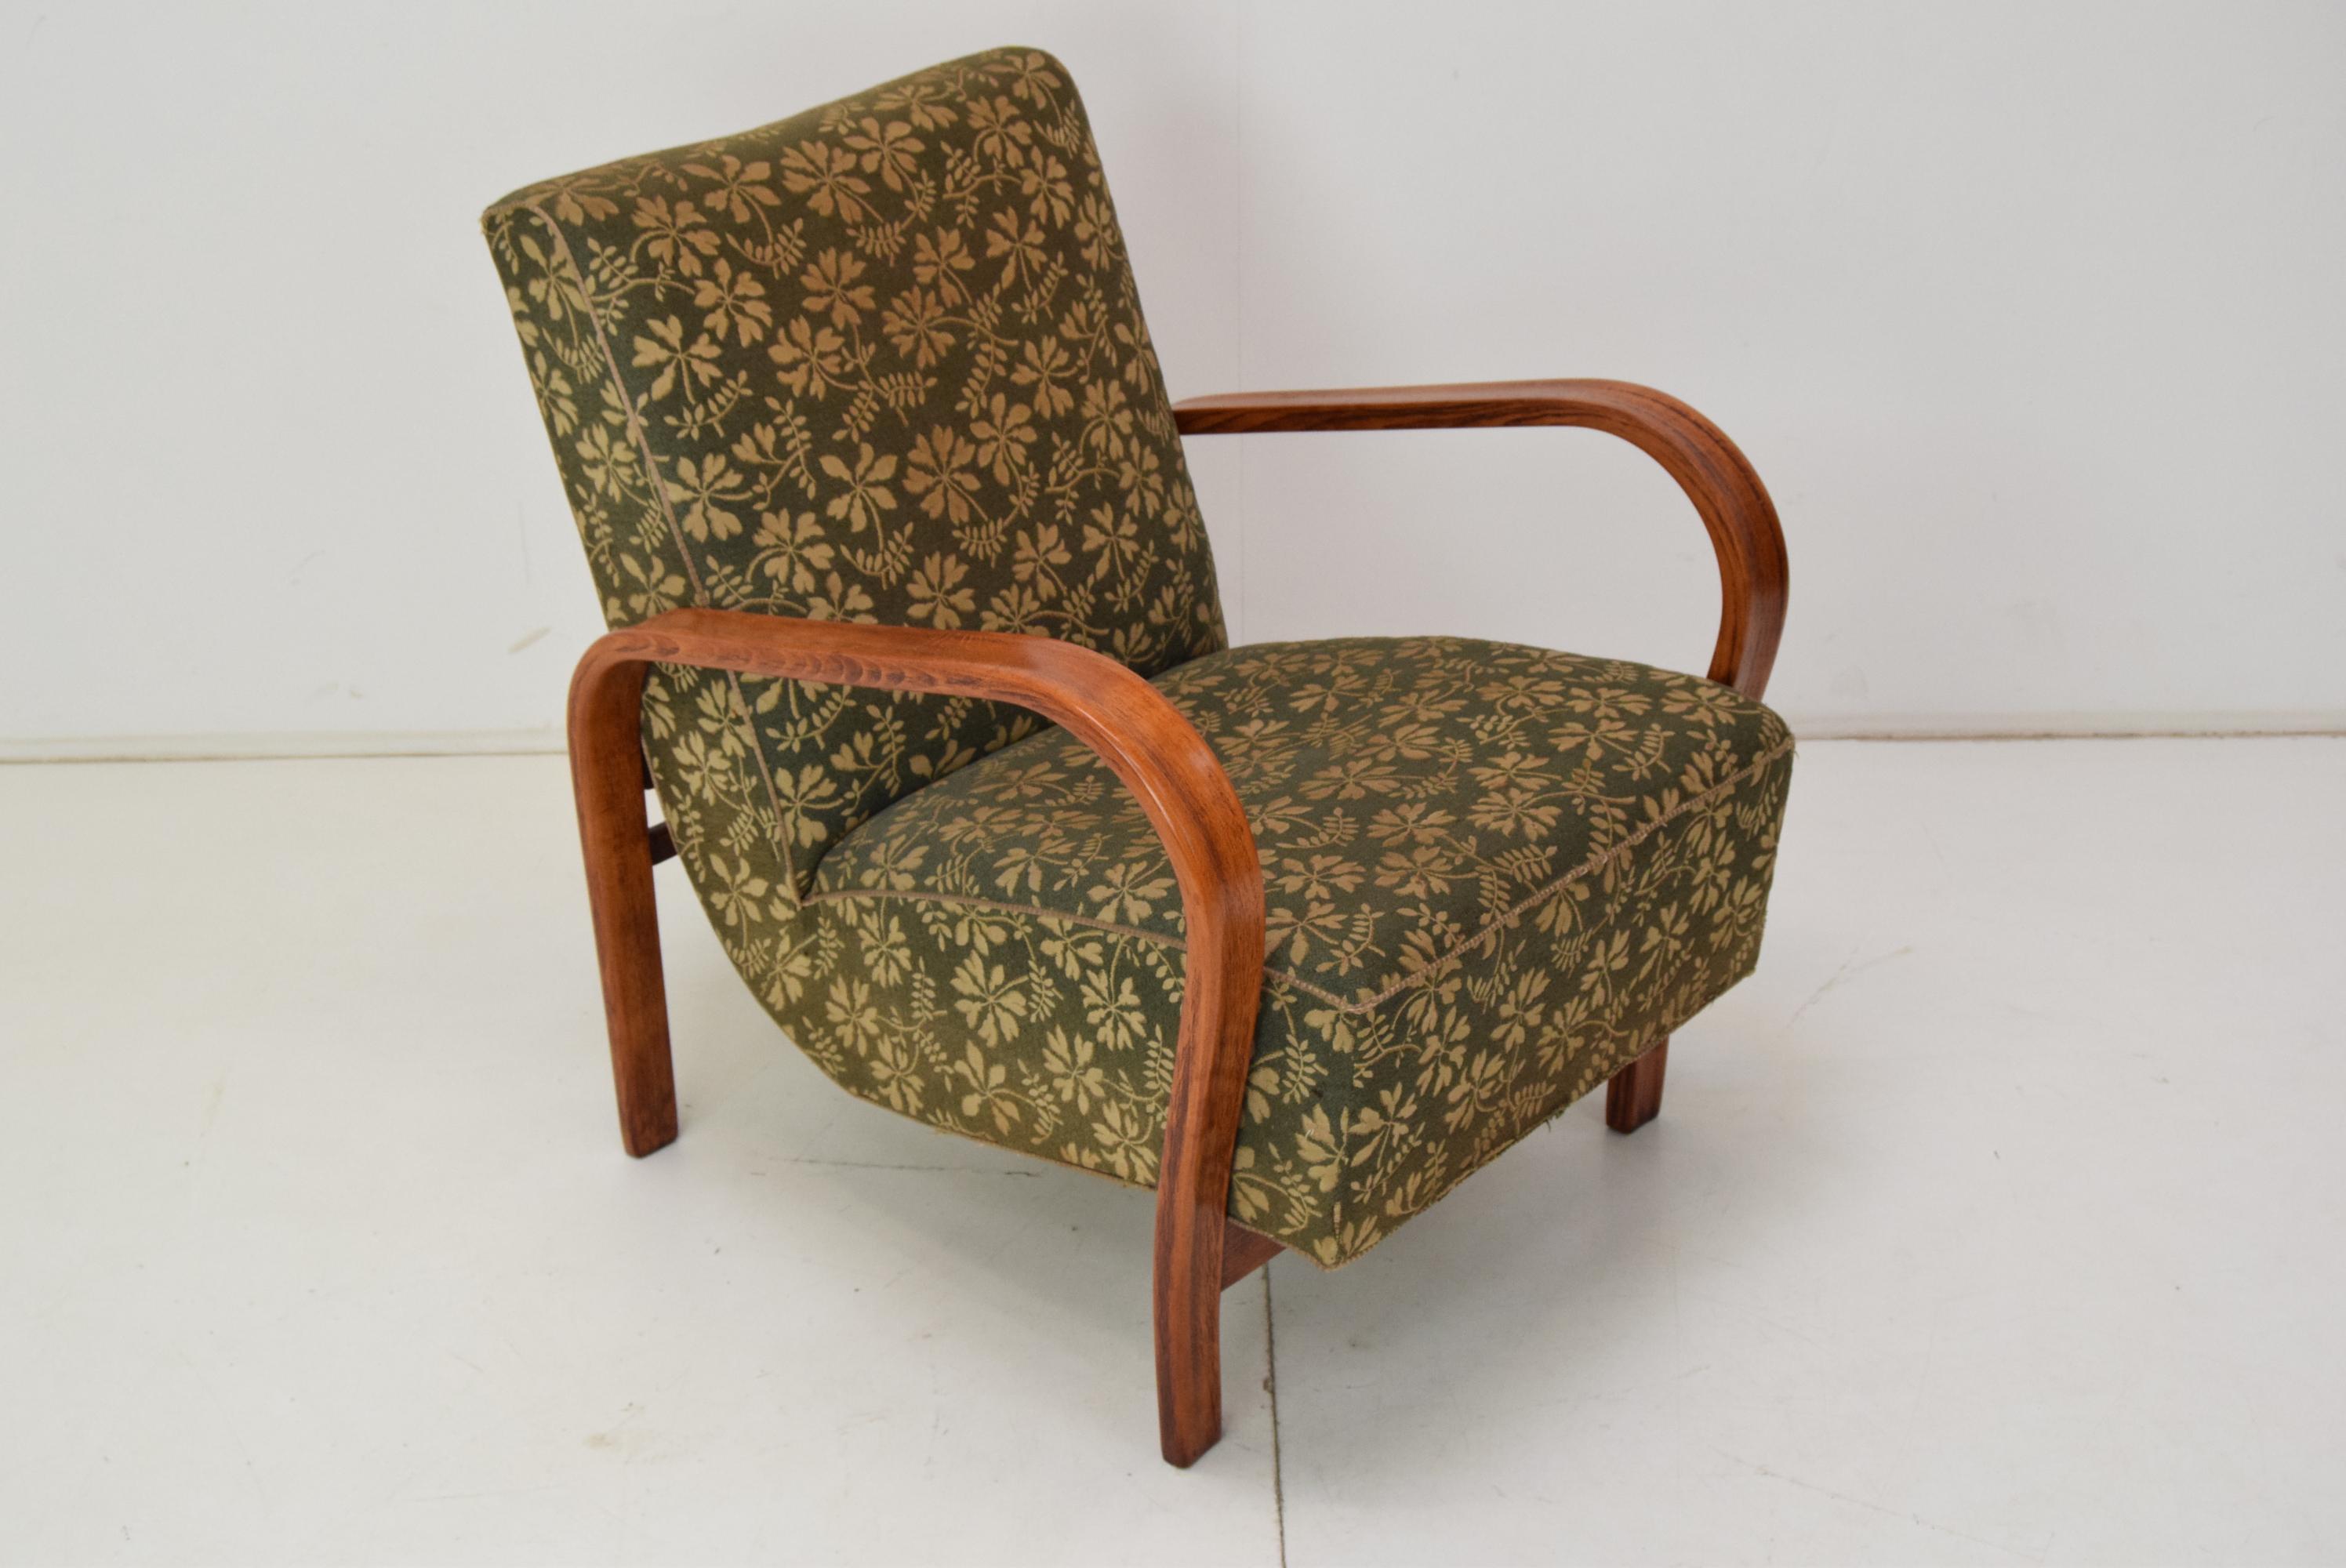 Made in Czechoslovakia.
Made of bentwood, fabric.
The fabric is suitable fot reupholstery.
Wood is good condition.
Two pieces in stock.
Original condition.